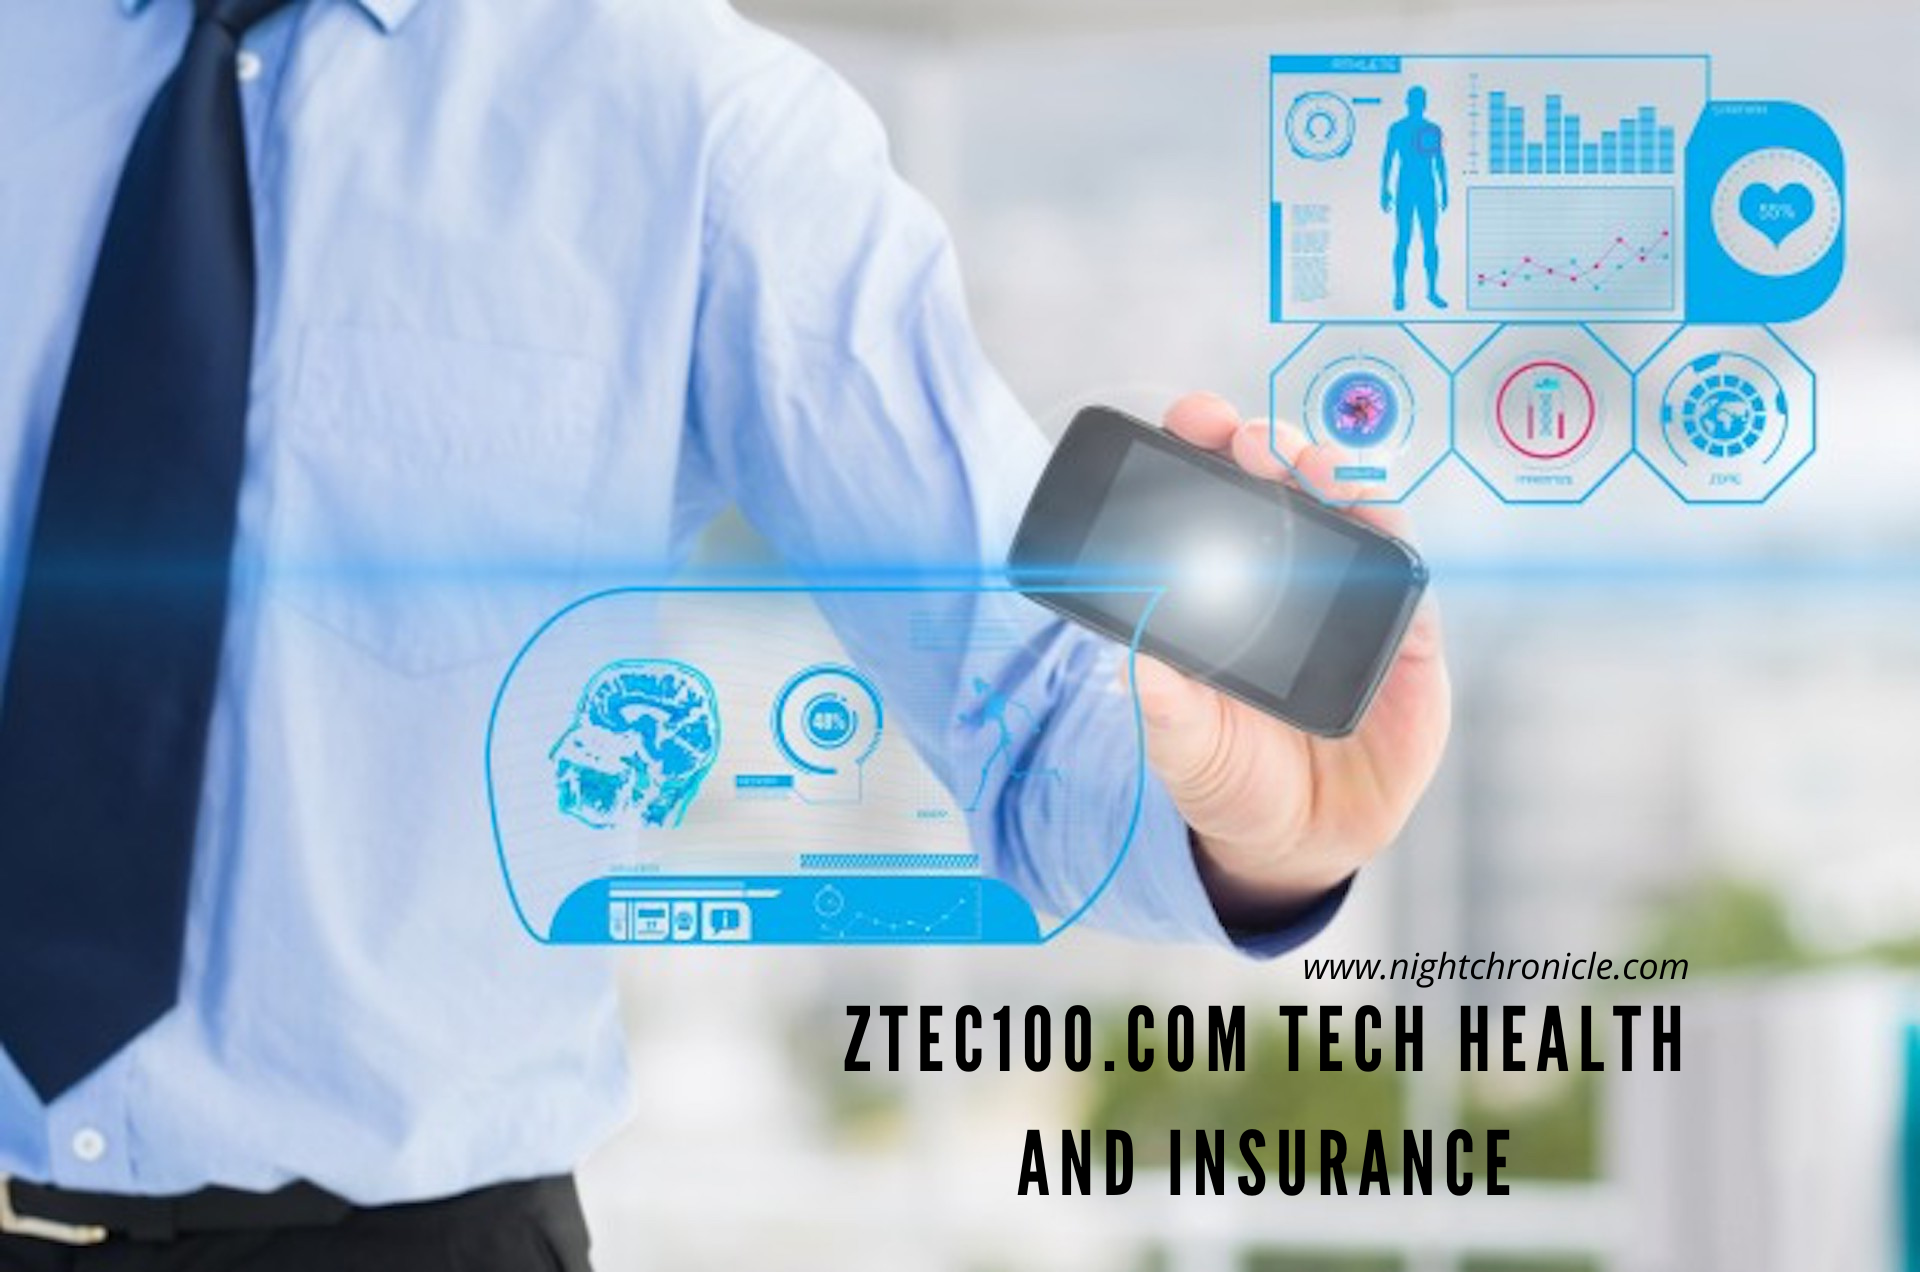 Empowering Users: Ztec100.com's Tech-Infused Health and Insurance Services